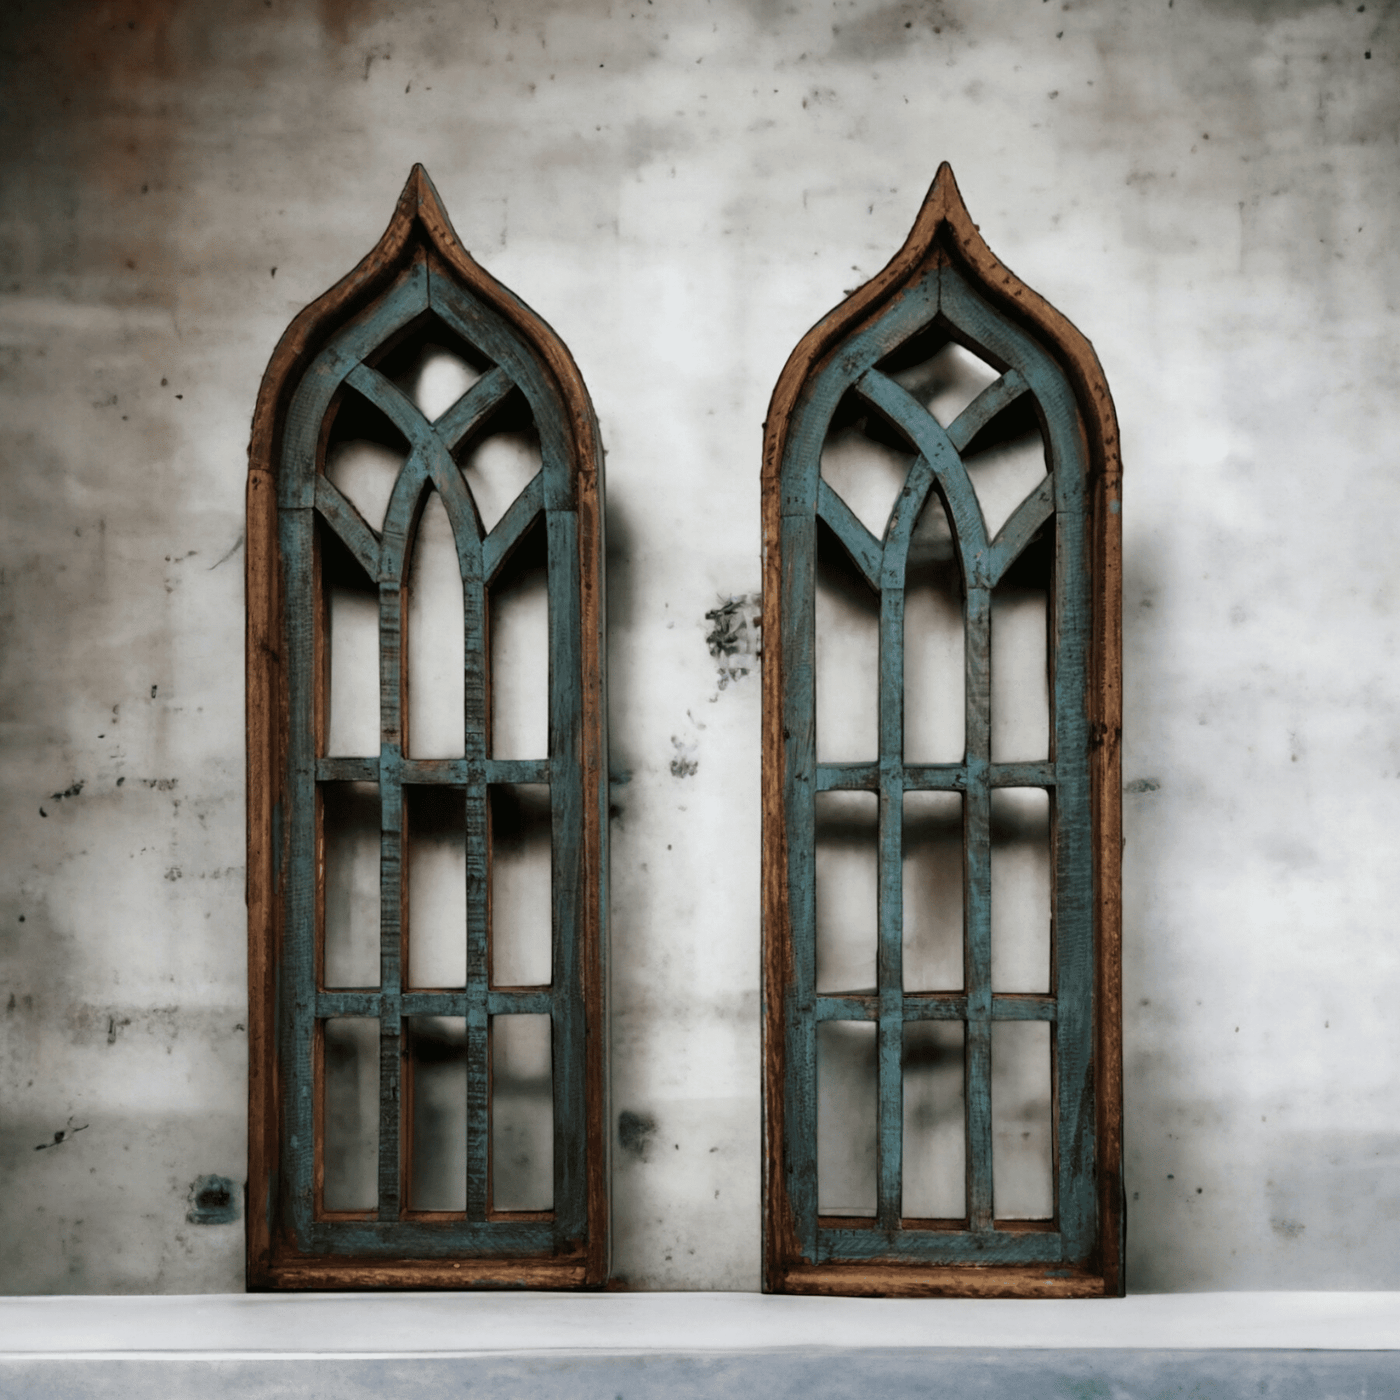 The Rustic Harmony Turquoise Farmhouse Rustic Wooden Wall Windows Arches Set of 2 - Ranch Junkie Mercantile LLC